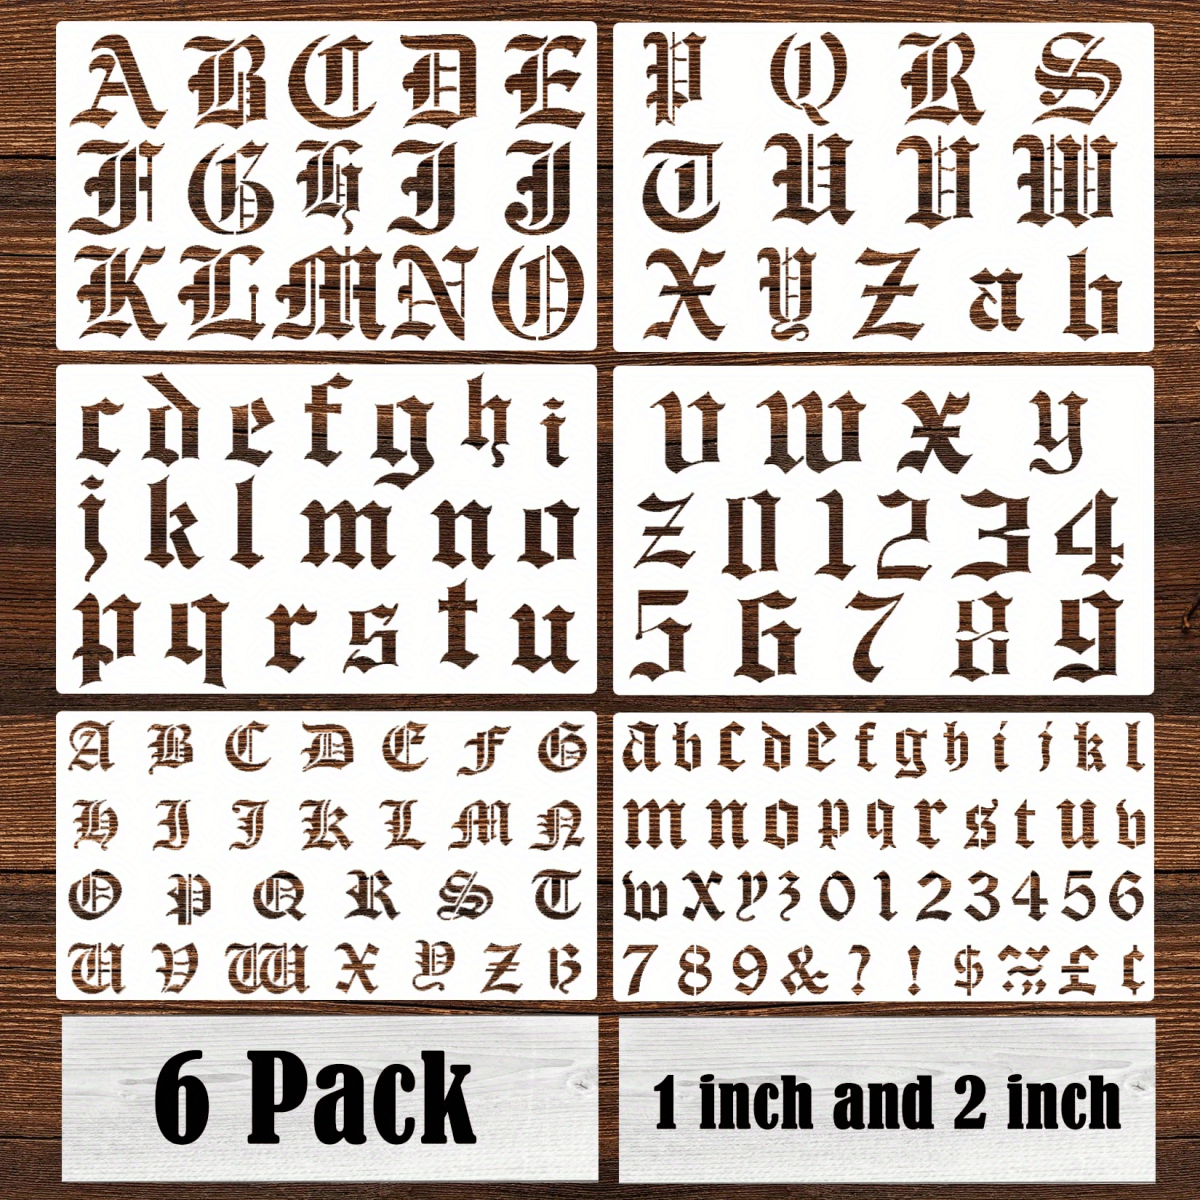 2 Inch Alphabet Letter Stencils for Painting - 70 Pack Letters and Numbers  Stencil Templates with Signs for Painting on Wood, Reusable Letter and